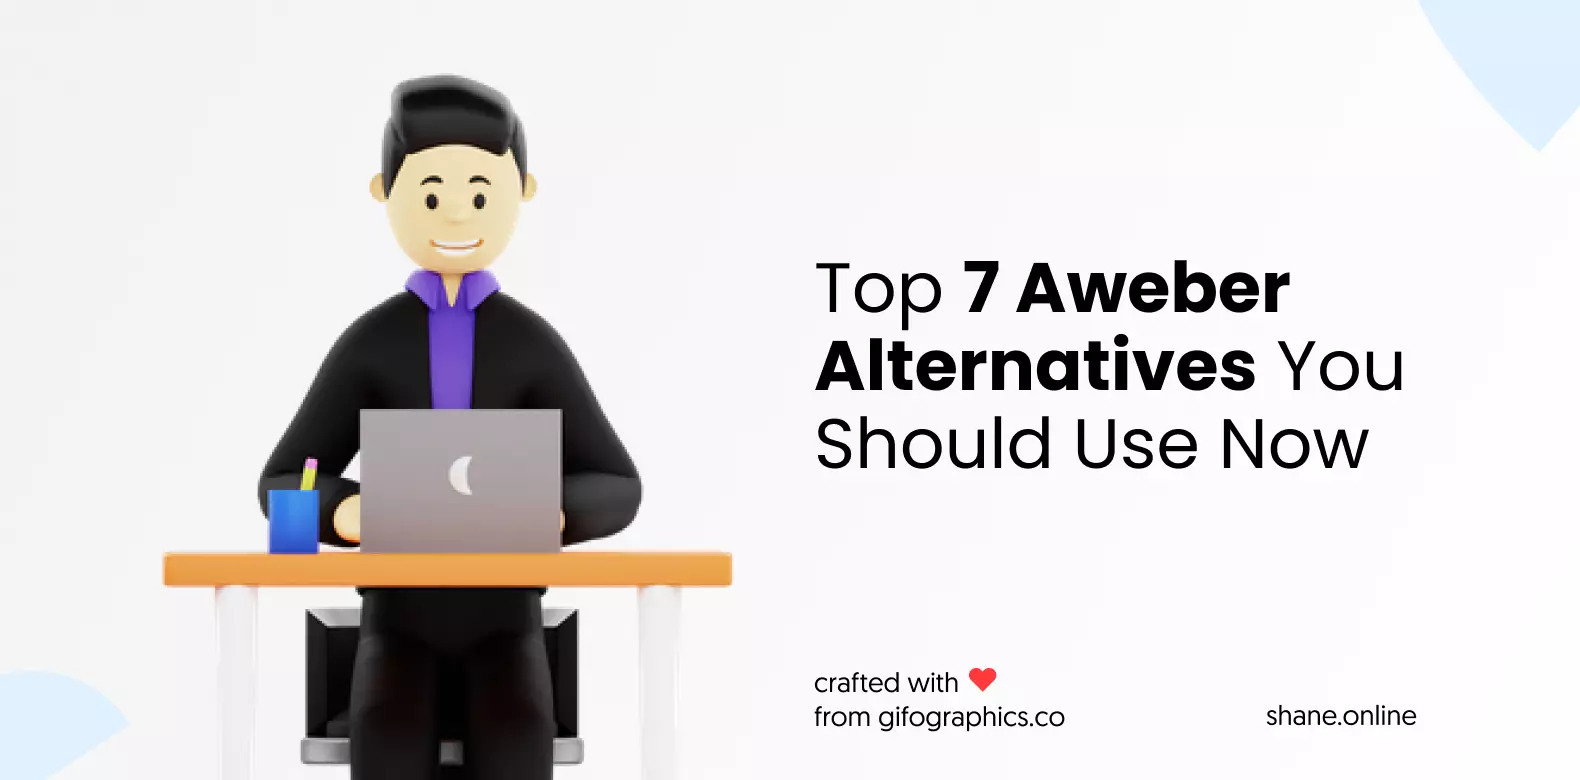 Top 7 Aweber Alternatives You Should Use Now